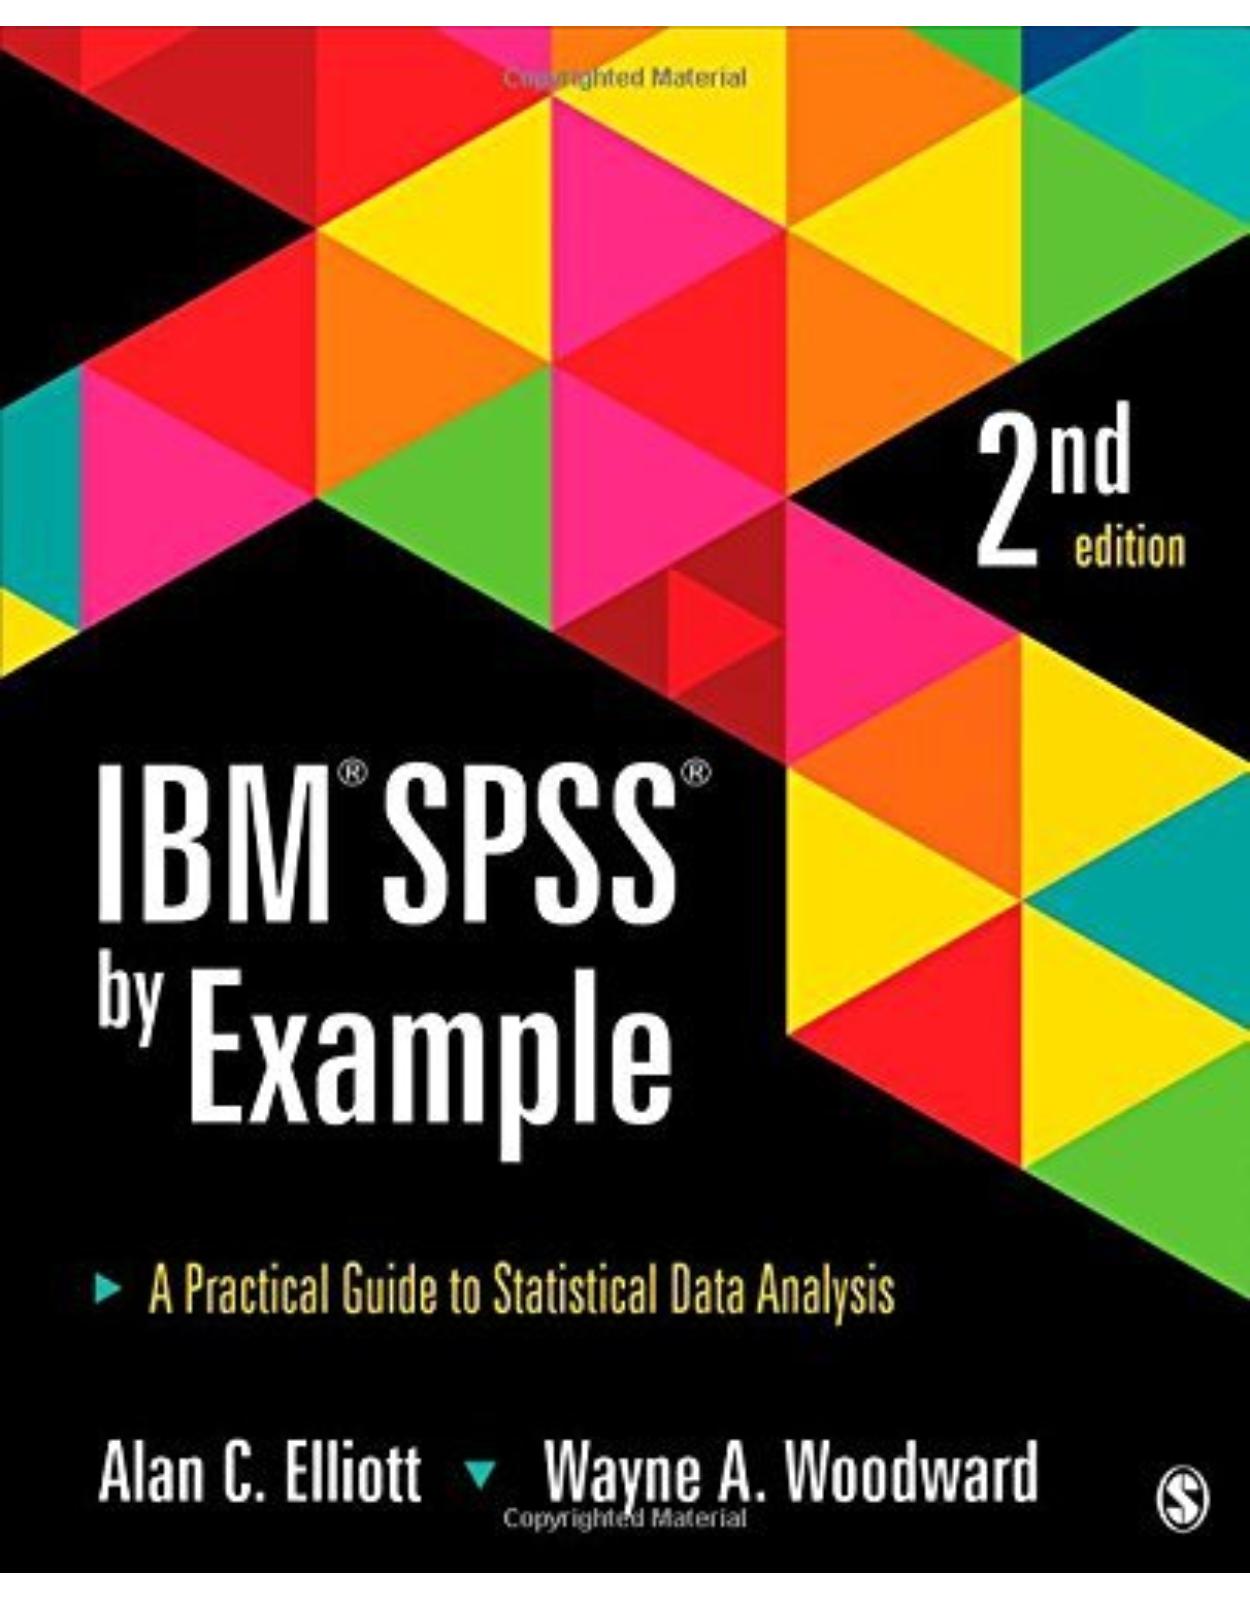 IBM SPSS by Example: A Practical Guide to Statistical Data Analysis